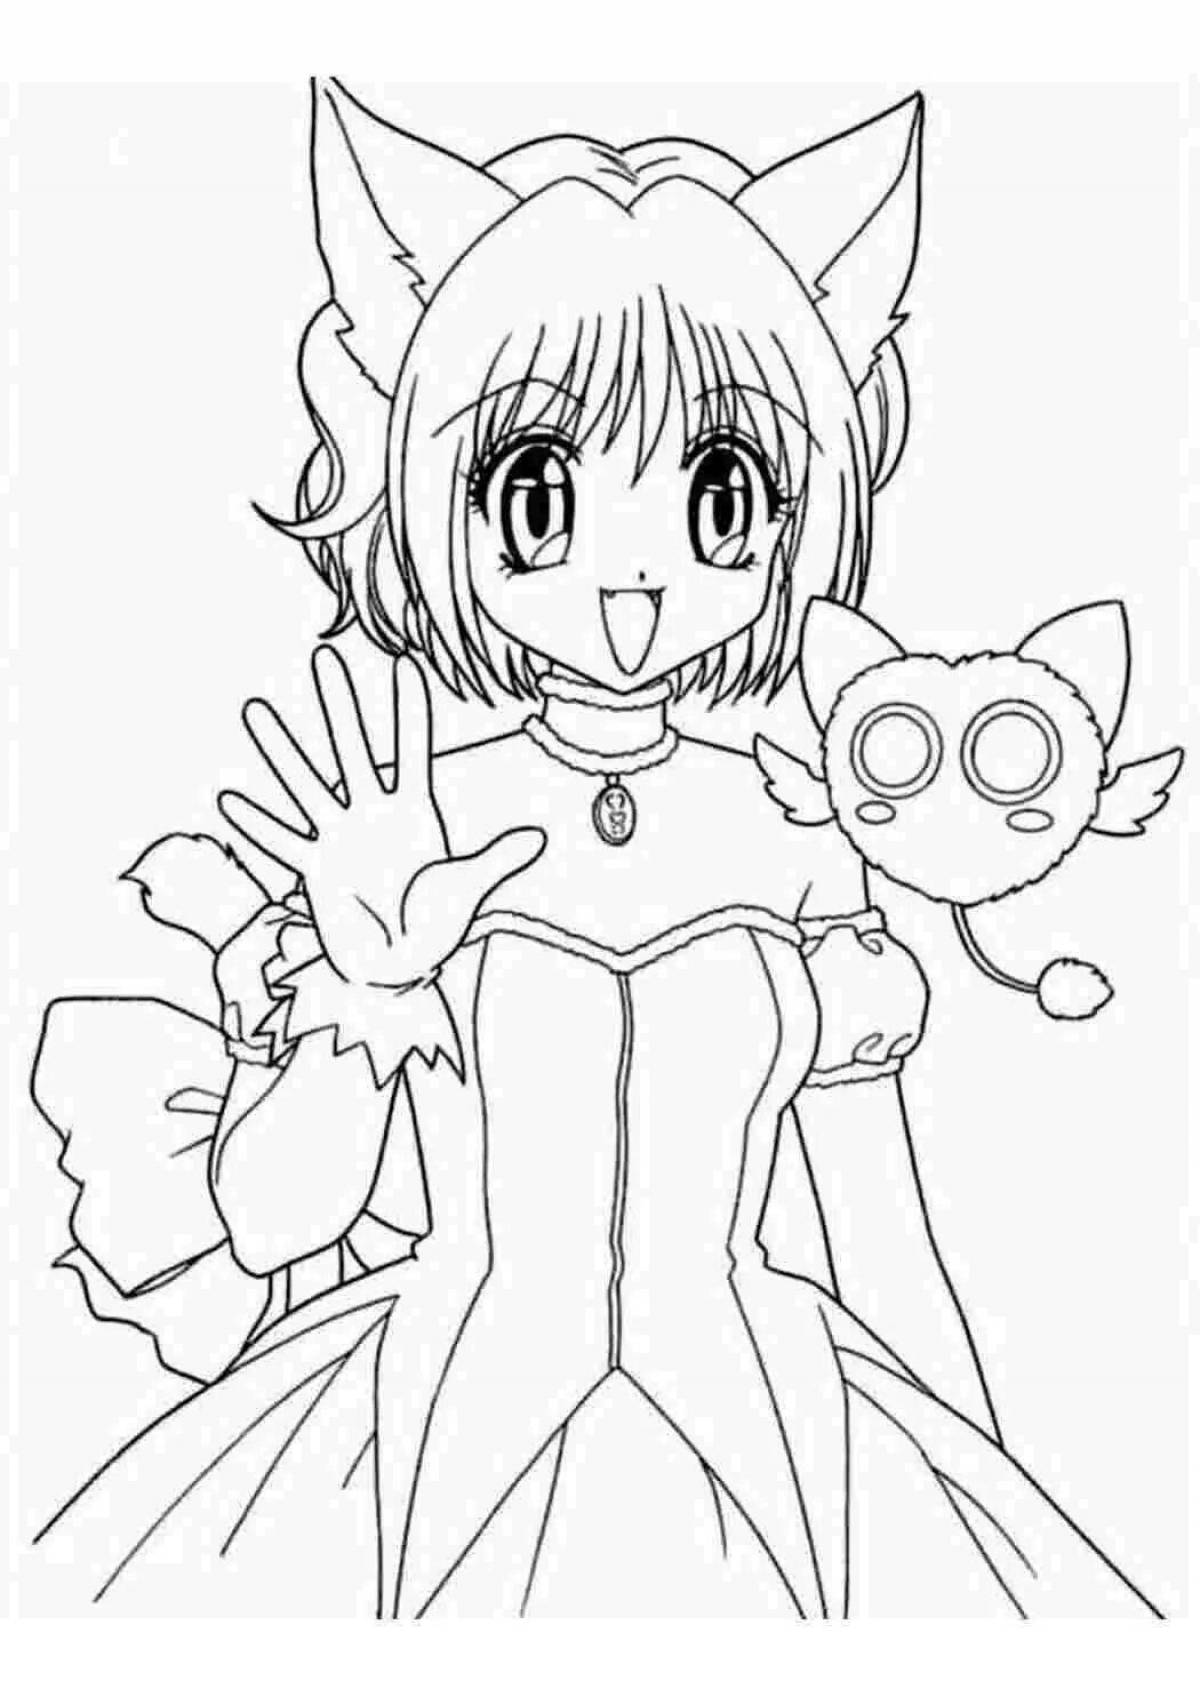 Kitty funny anime coloring book